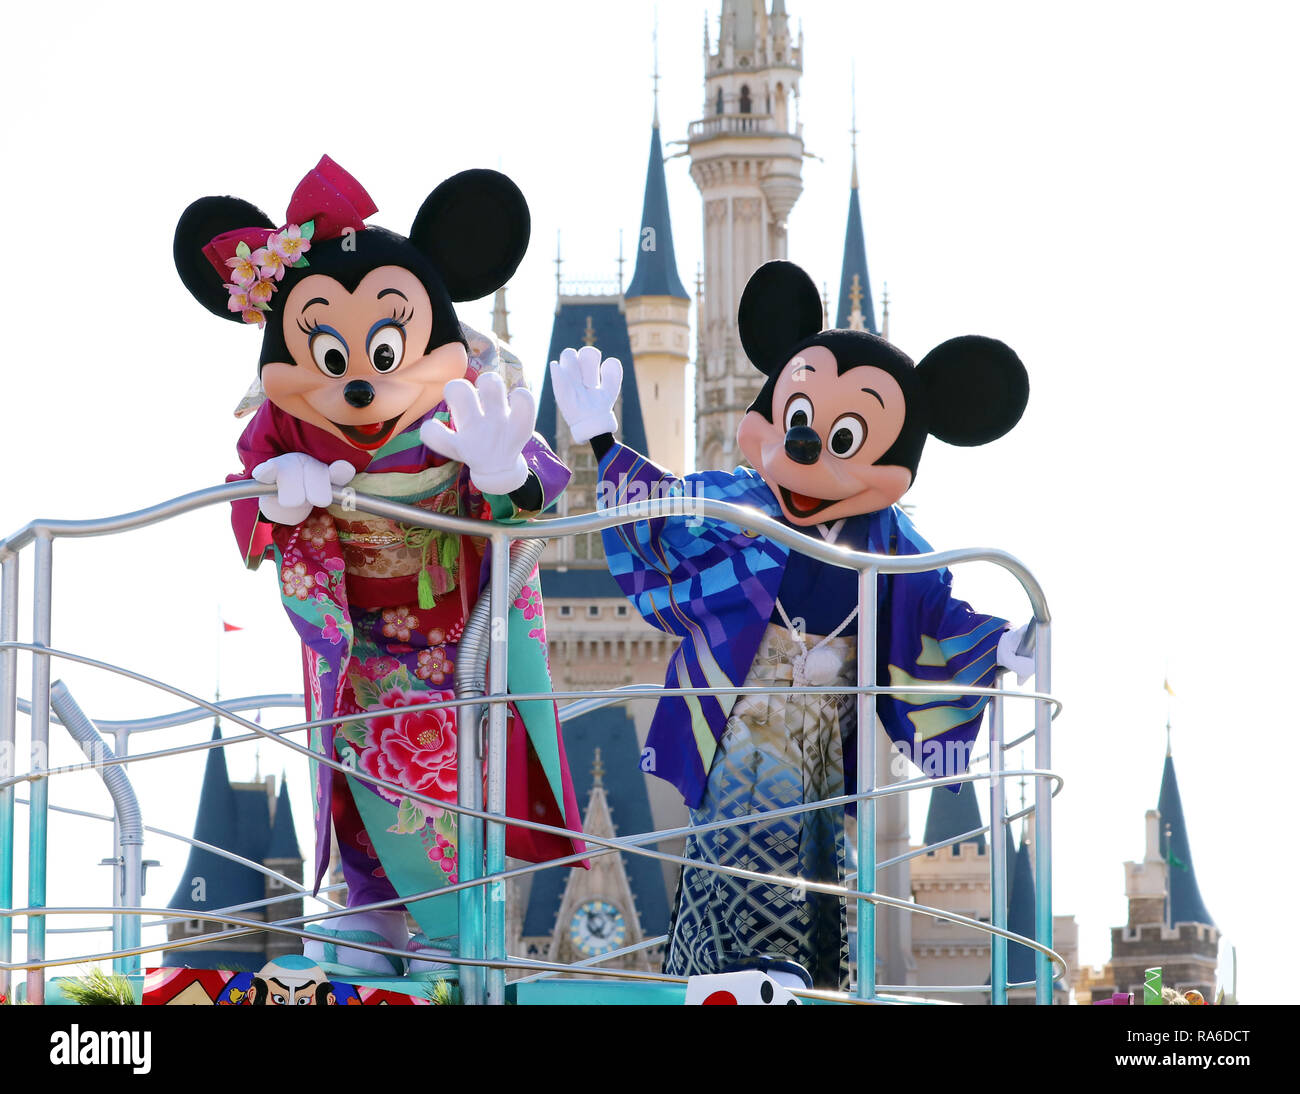 Urayasu, Japan. 1st Jan, 2019. Disney characters Mickey and Minnie Mouse  dressed in traditional kimono dresses, greet guests from a float during the  theme park's annual New Year's Day parade at the